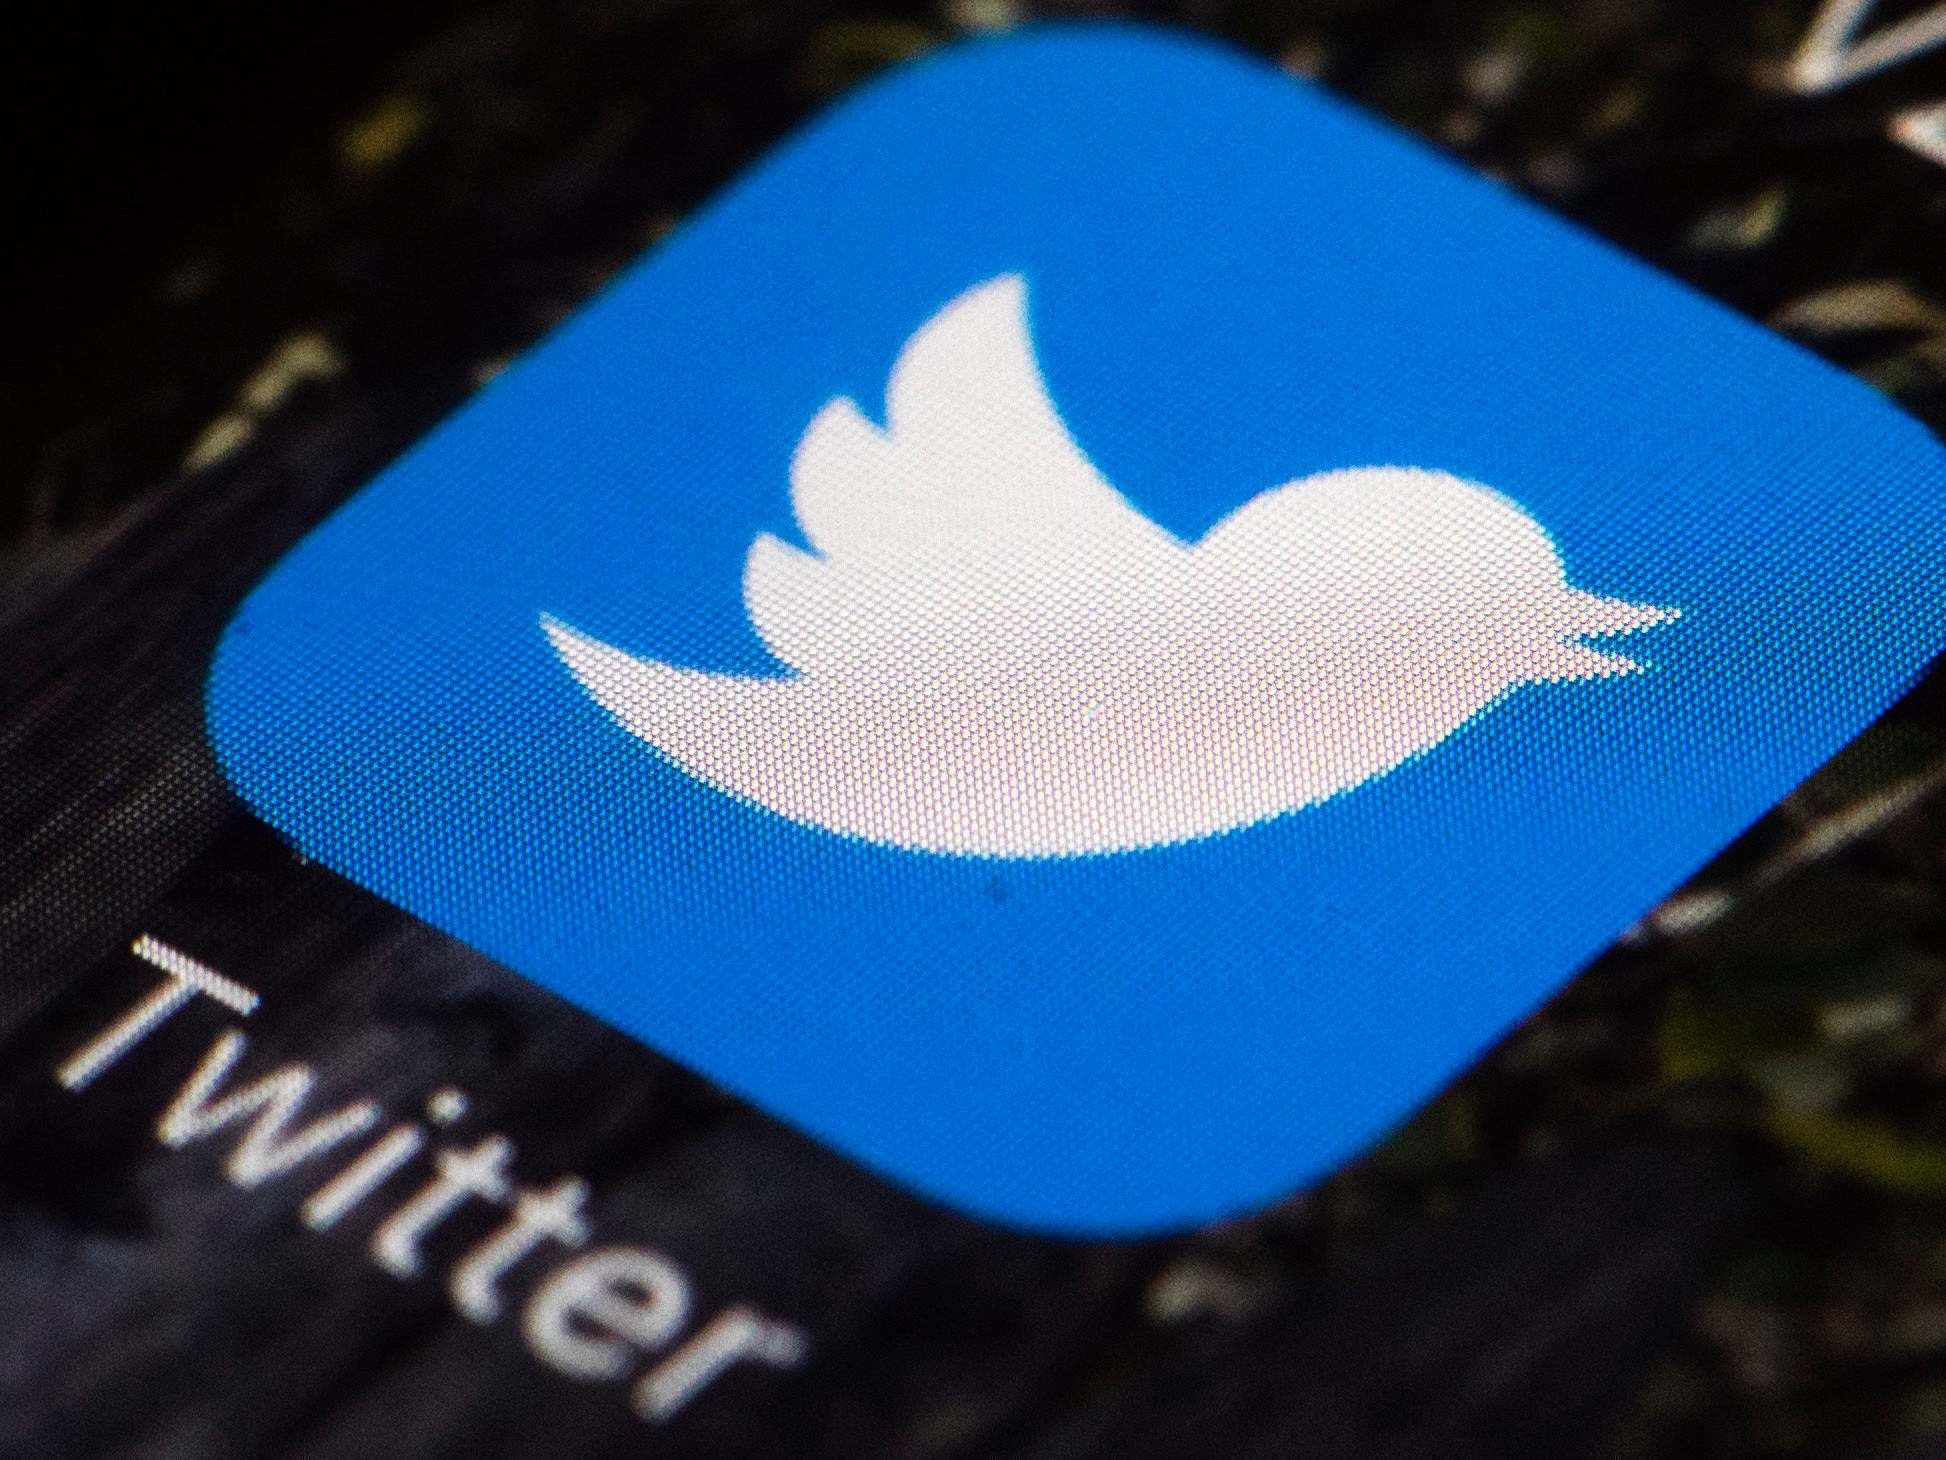 Twitter's average daily user growth spiked 34% in the second quarter of 2020